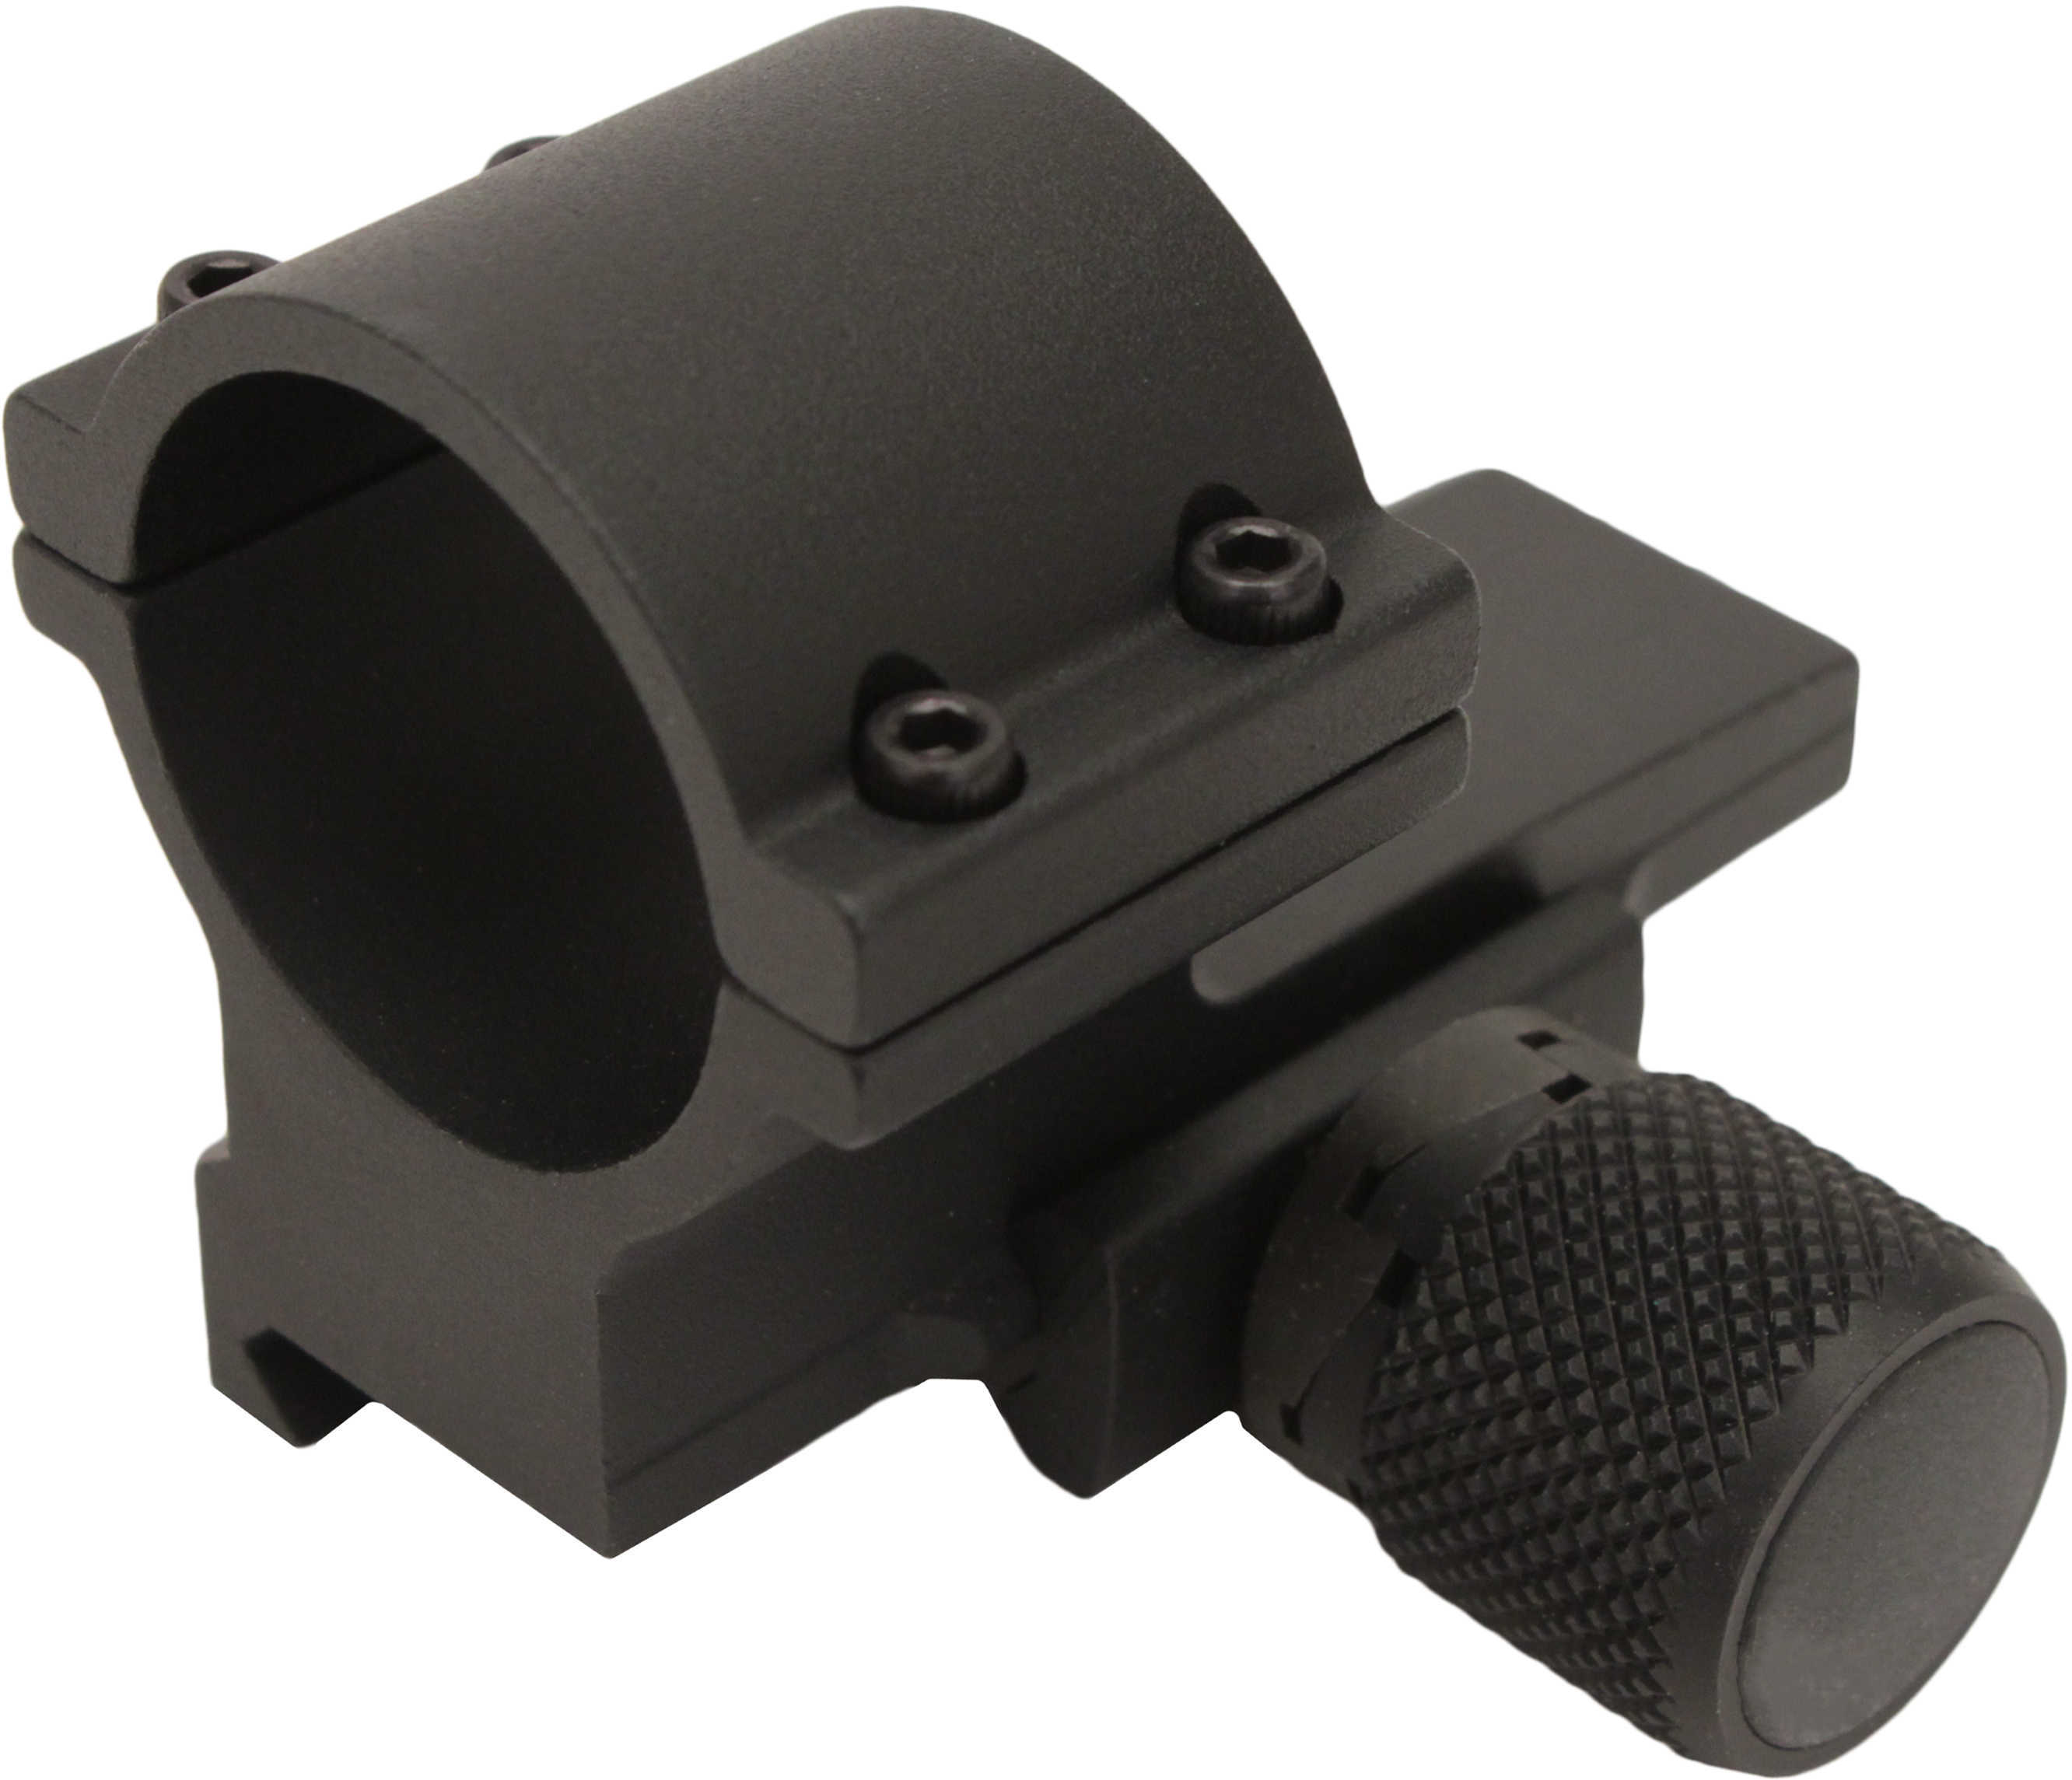 Aimpoint Mount QRP3 Complete Md: 12923